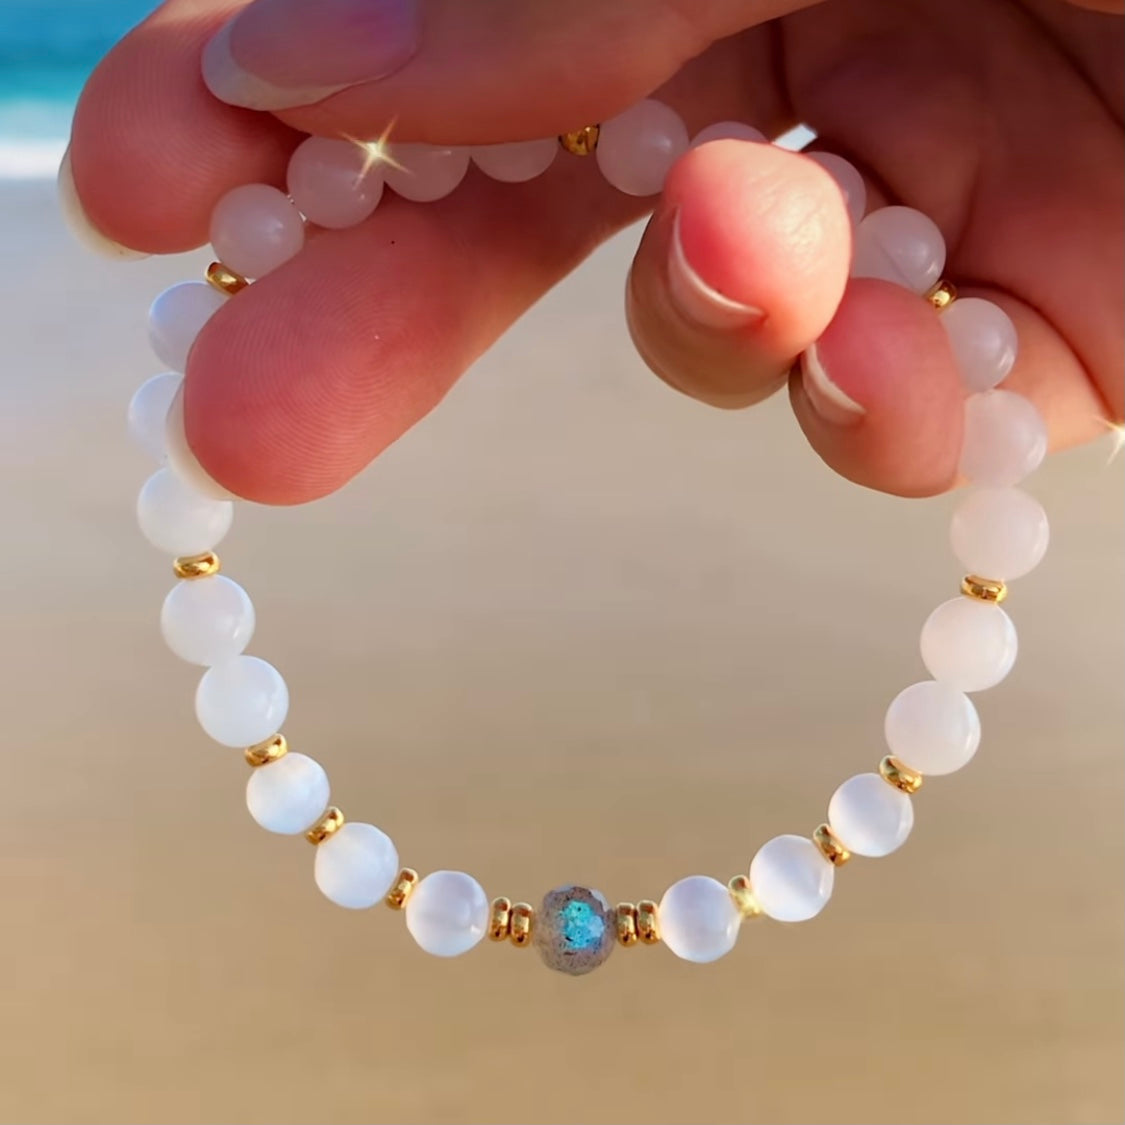 White Moonstone and Selenite yoga bracelet with a faceted Labradorite focal bead. Gold or sterling silver accents.